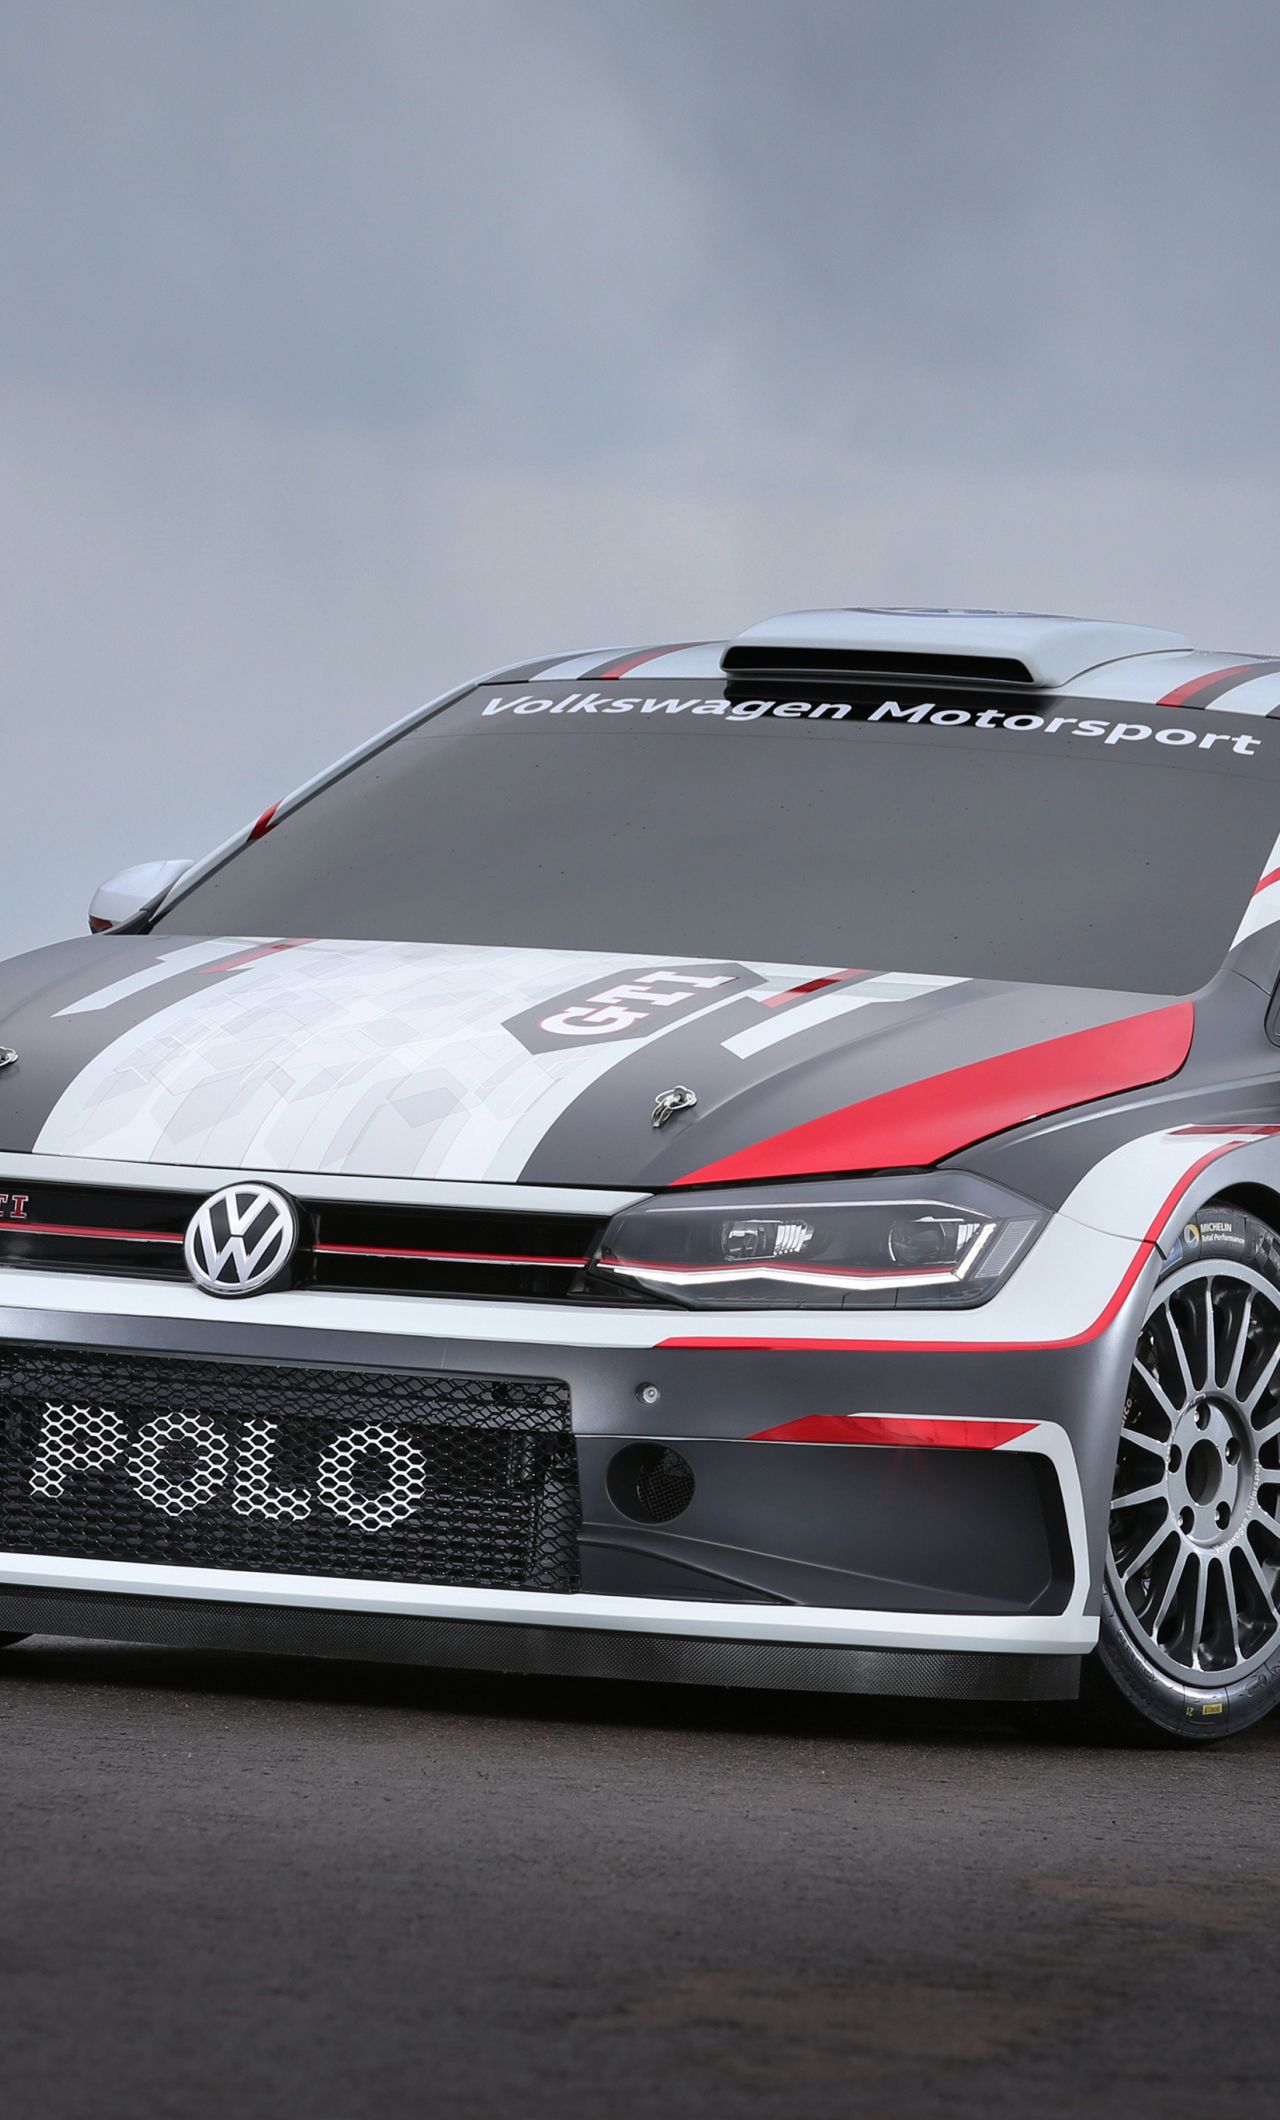 Download 1280x2120 wallpaper volkswagen polo gti r front, iphone 6 plus, 1280x2120 HD image, background, 2527